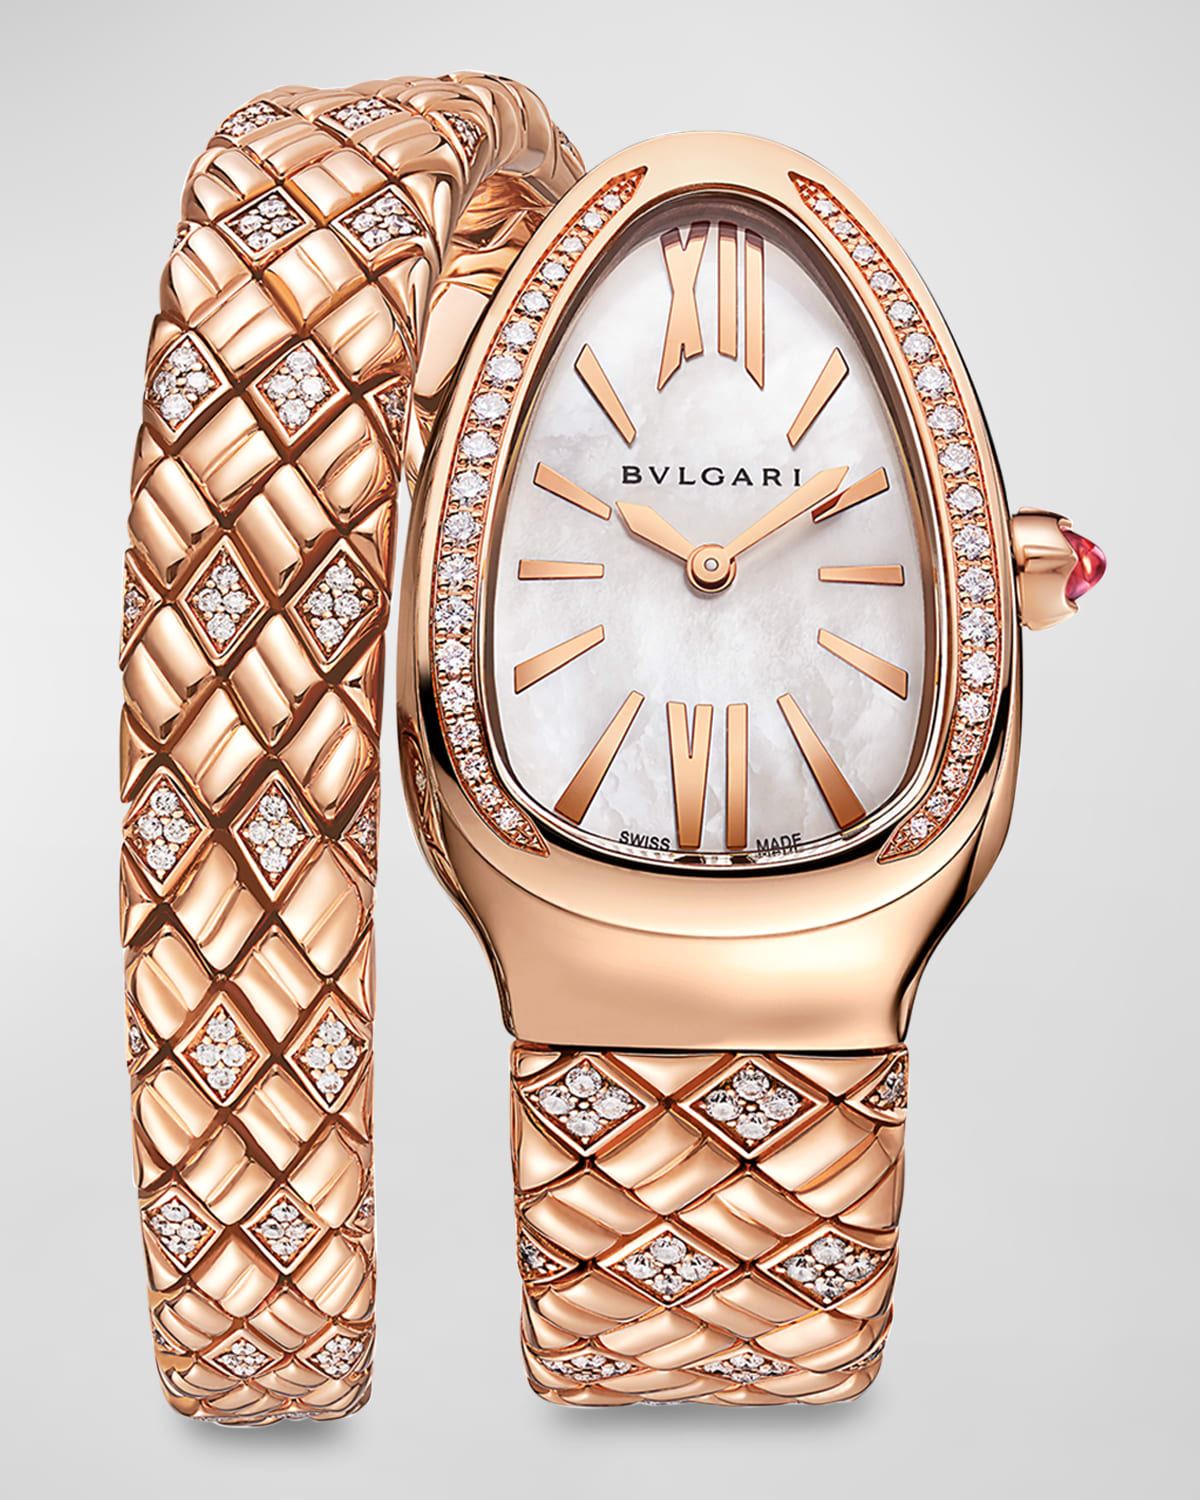 BVLGARI Serpenti Spiga 18k Rose Gold Diamond 1-Twirl Watch with Mother-of-Pearl Dial